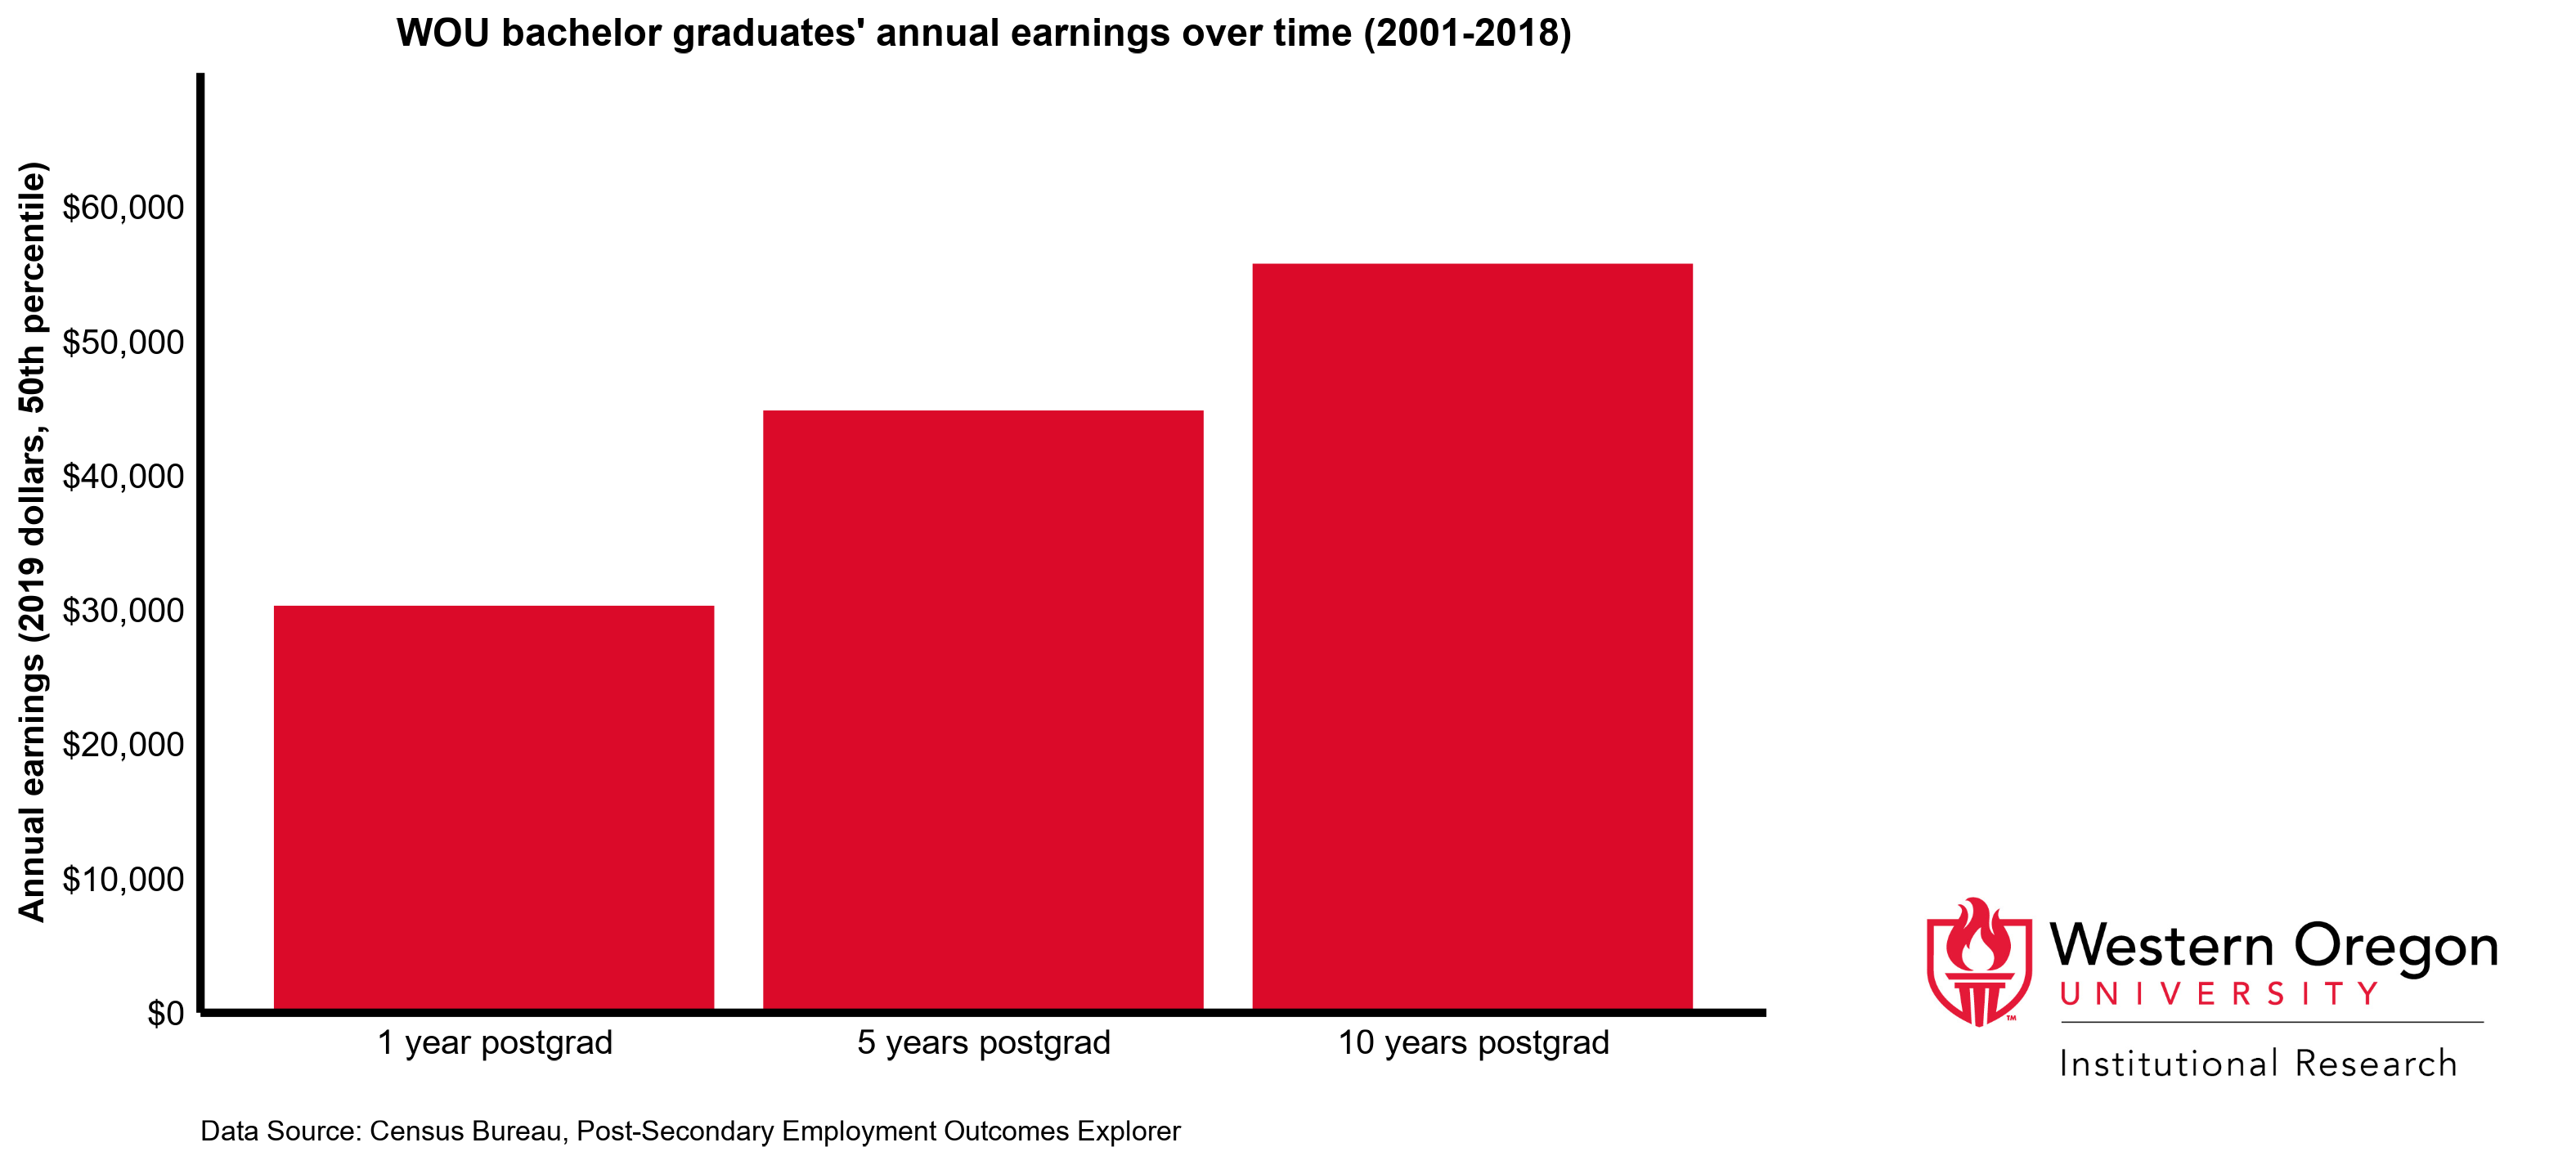 Bar chart of WOU bacvhelor graduates' annual earnings over time (2001-2018), showing that earnings increase over time.